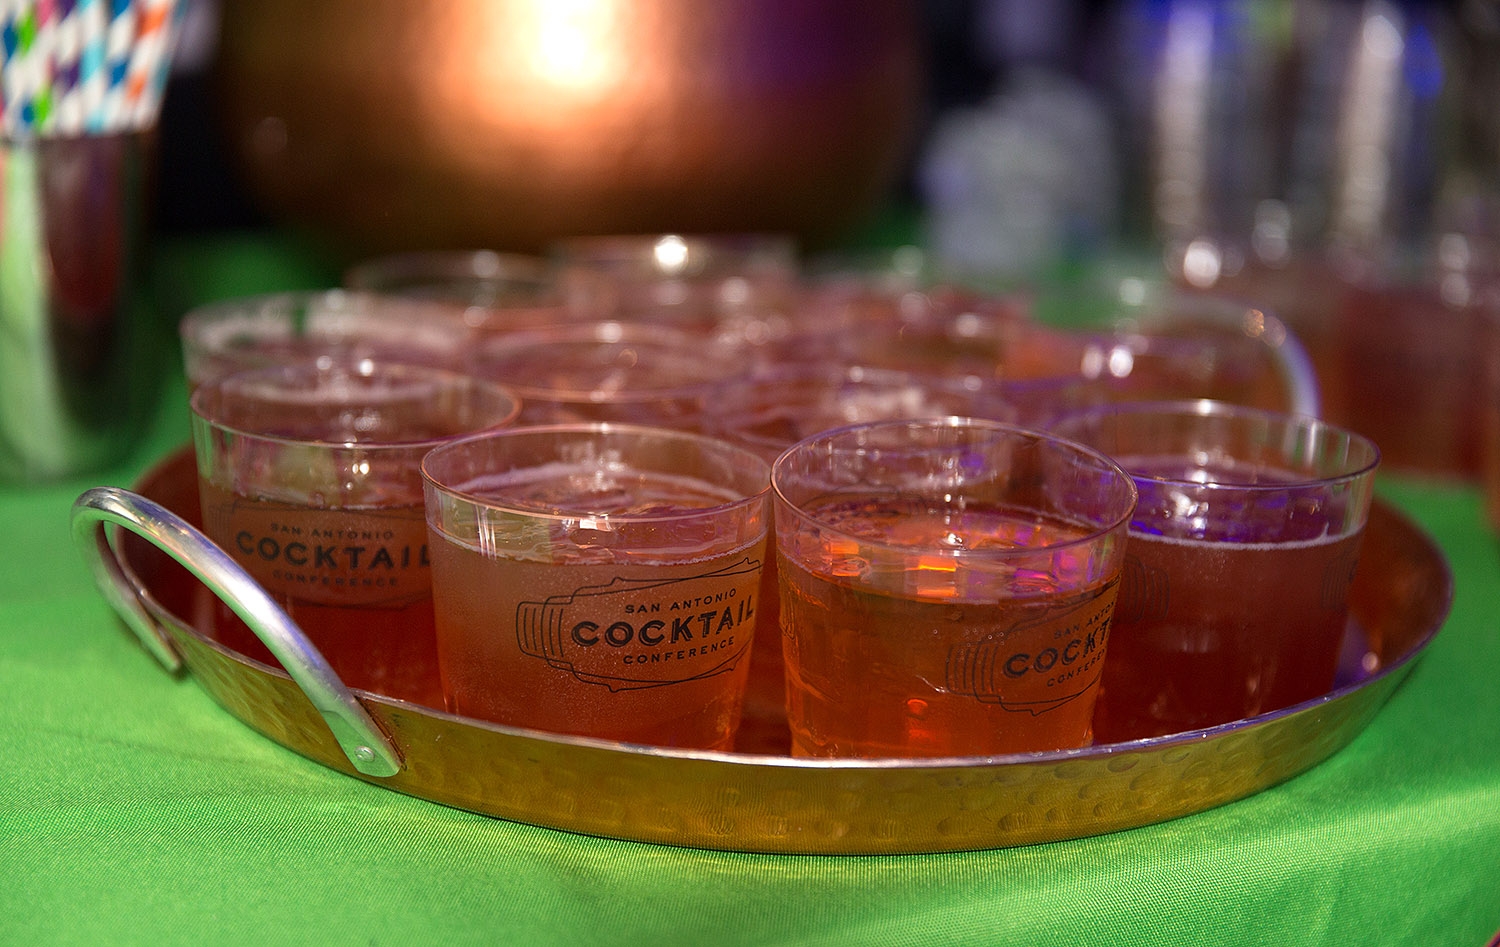 Cocktail enthusiasts attend Cocktails in the Enchanted Forest during the 2019 San Antonio Cocktail Festival Saturday night at Villita Assembly Hall.